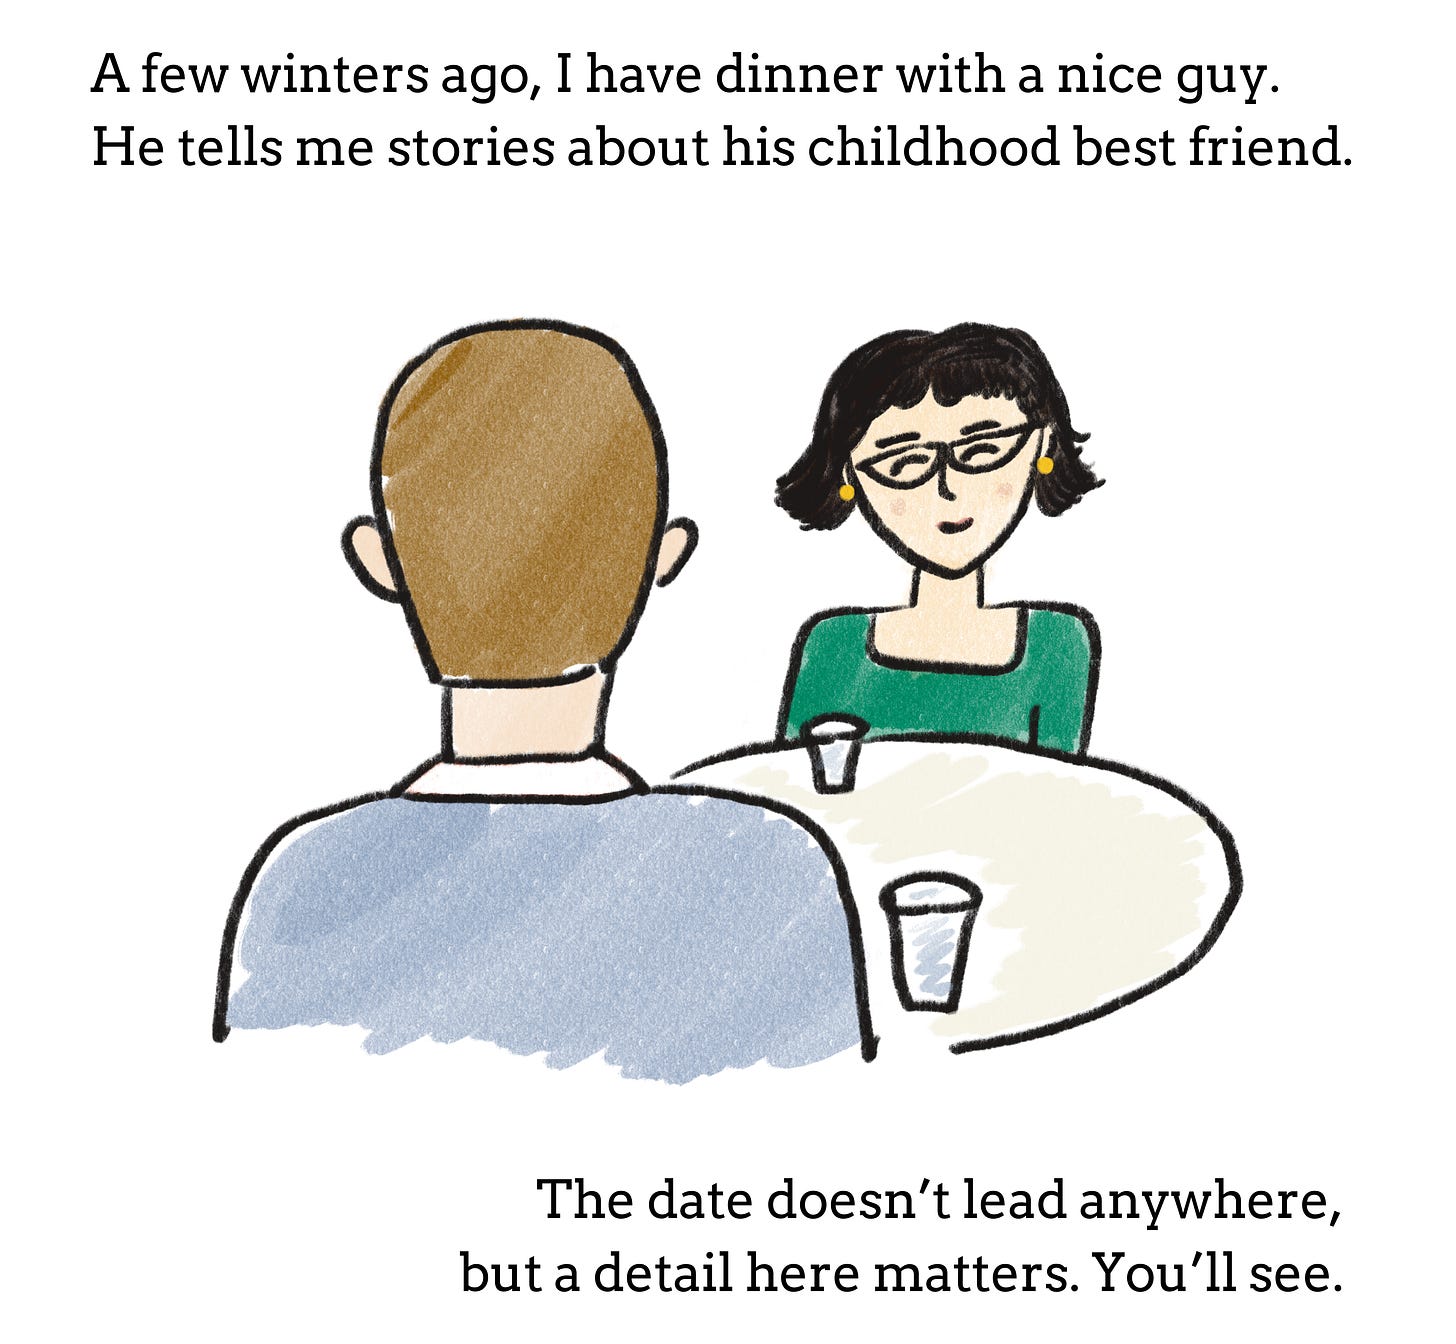 An illustration of the author, Erika, sitting across from a guy at a table. The text reads: "A few winters ago, I have dinner with a nice guy. He tells me stories about his childhood best friend. The date doesn't lead anywhere, but a detail here matters. You'll see."